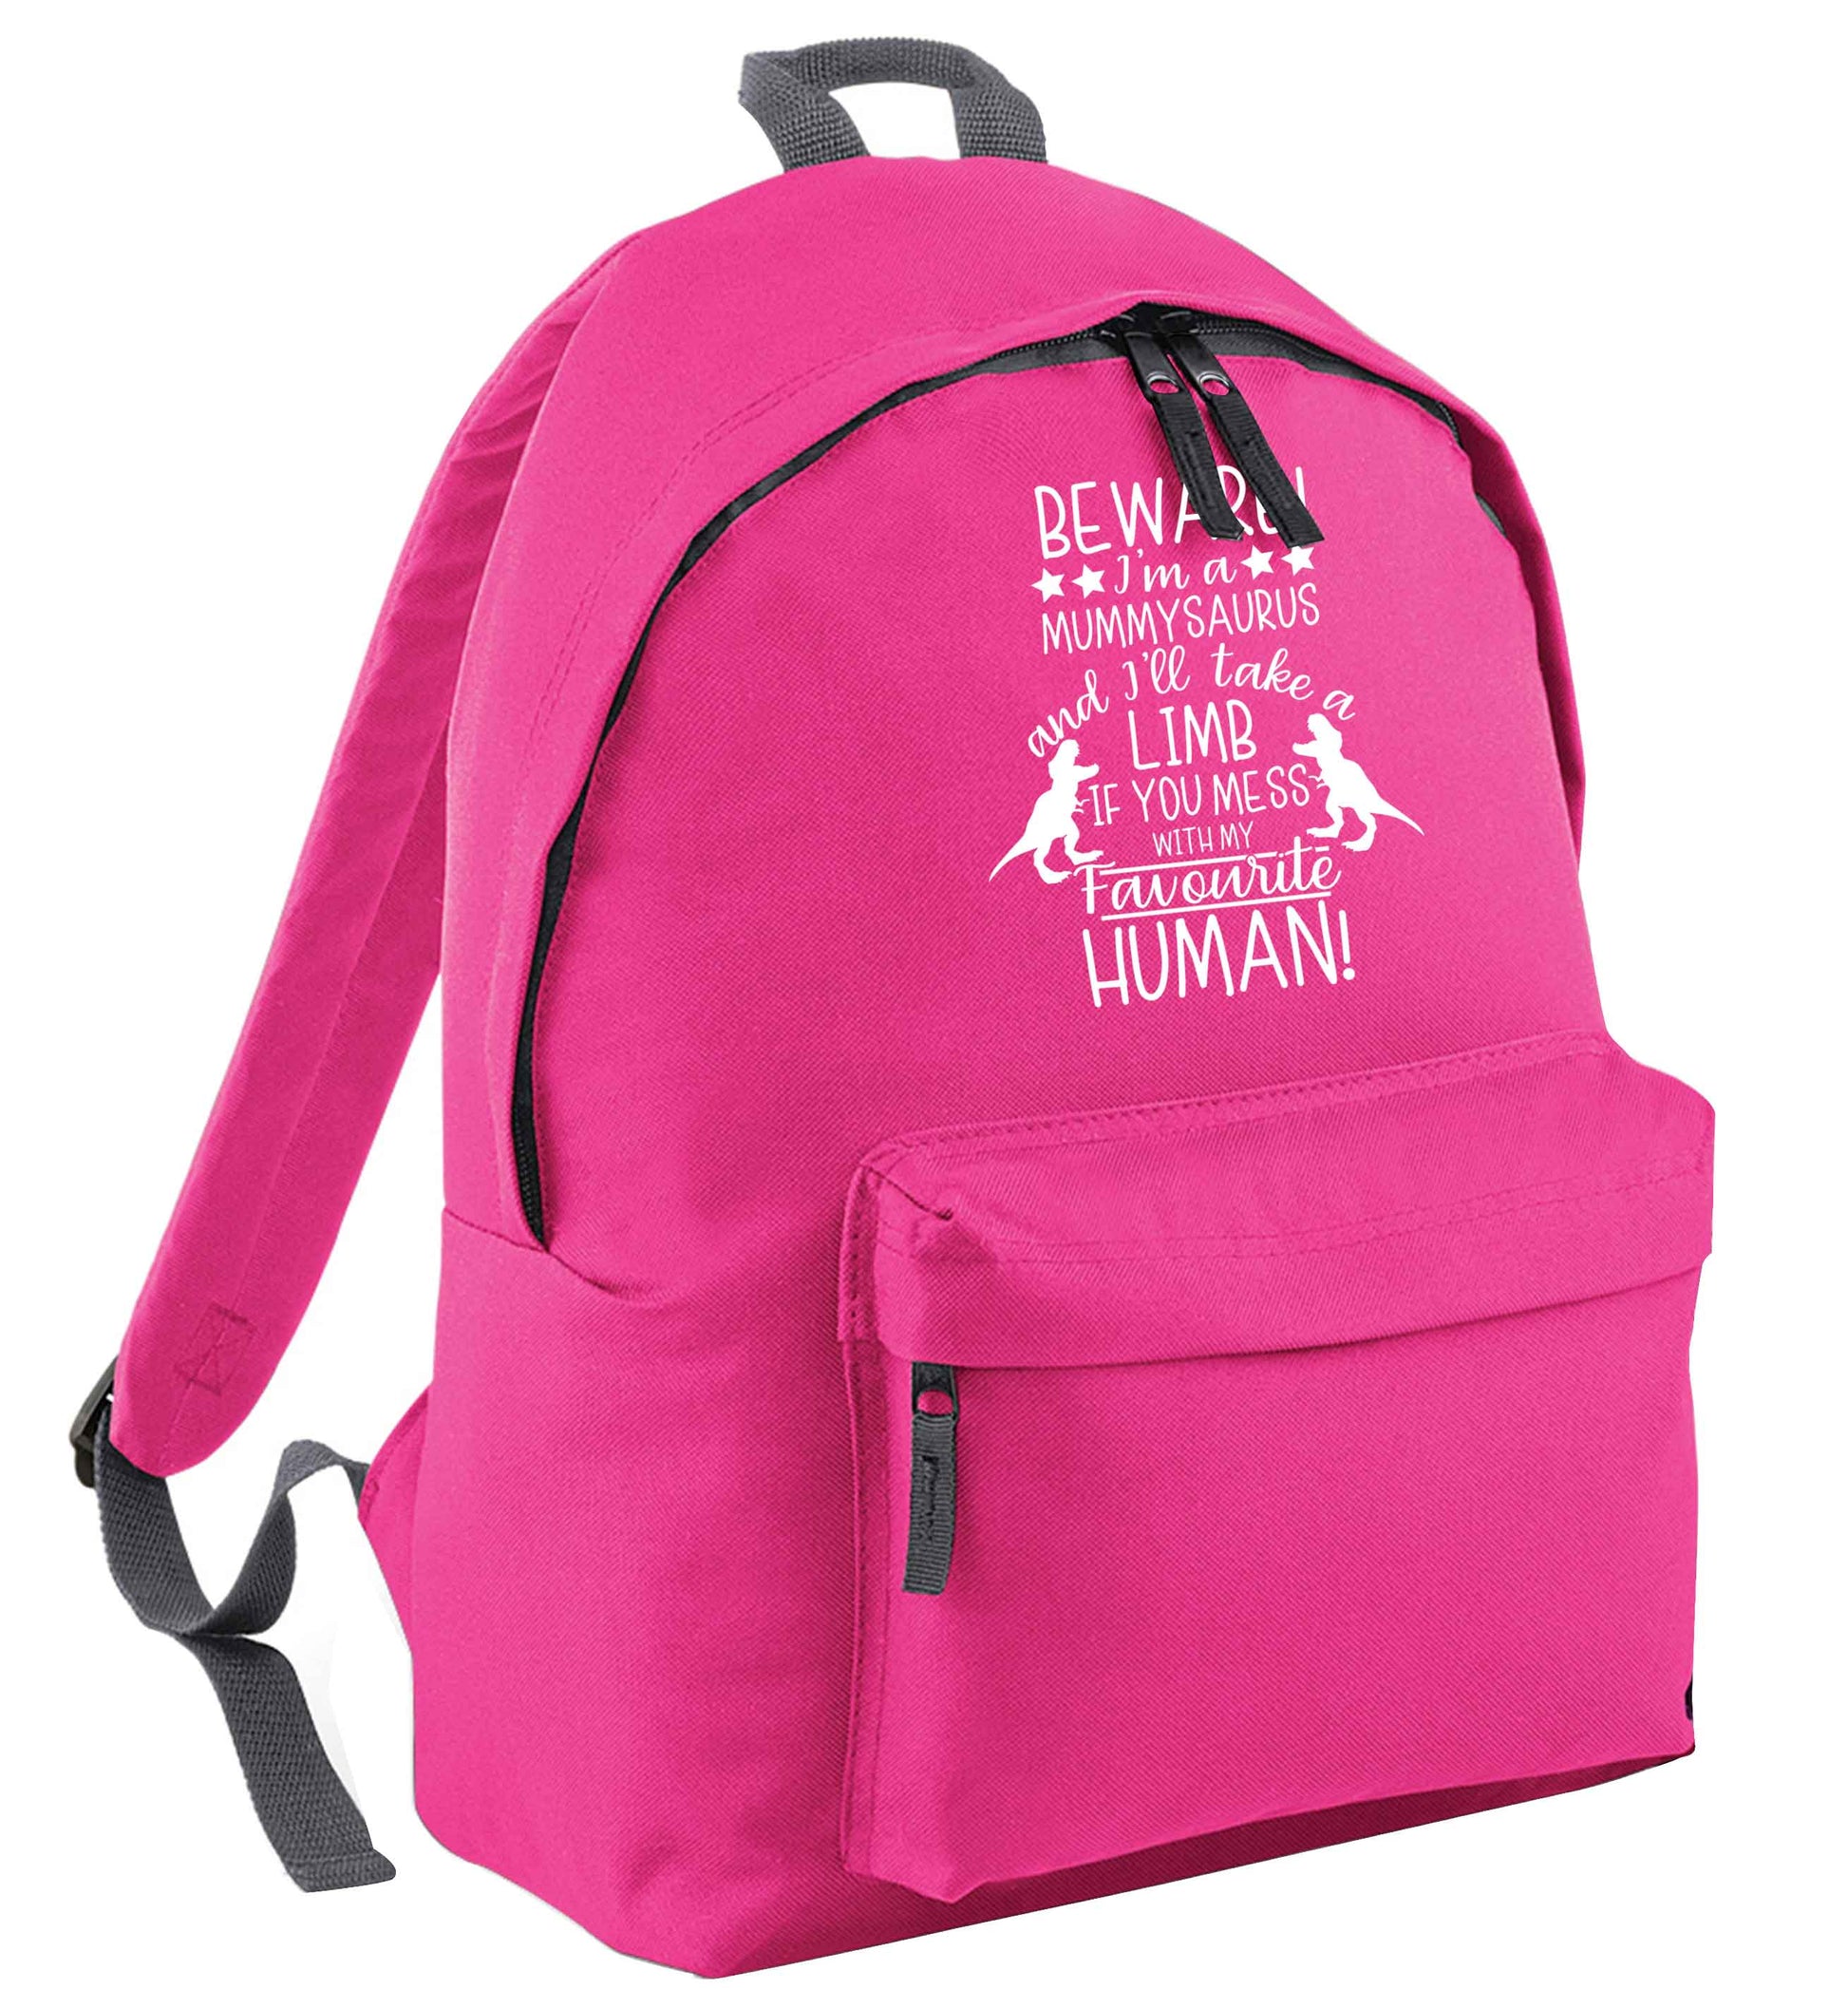 Perfect gift for any protective mummysaurus! Beware I'm a mummysaurus and I'll take a limb if you mess with my favourite human pink adults backpack